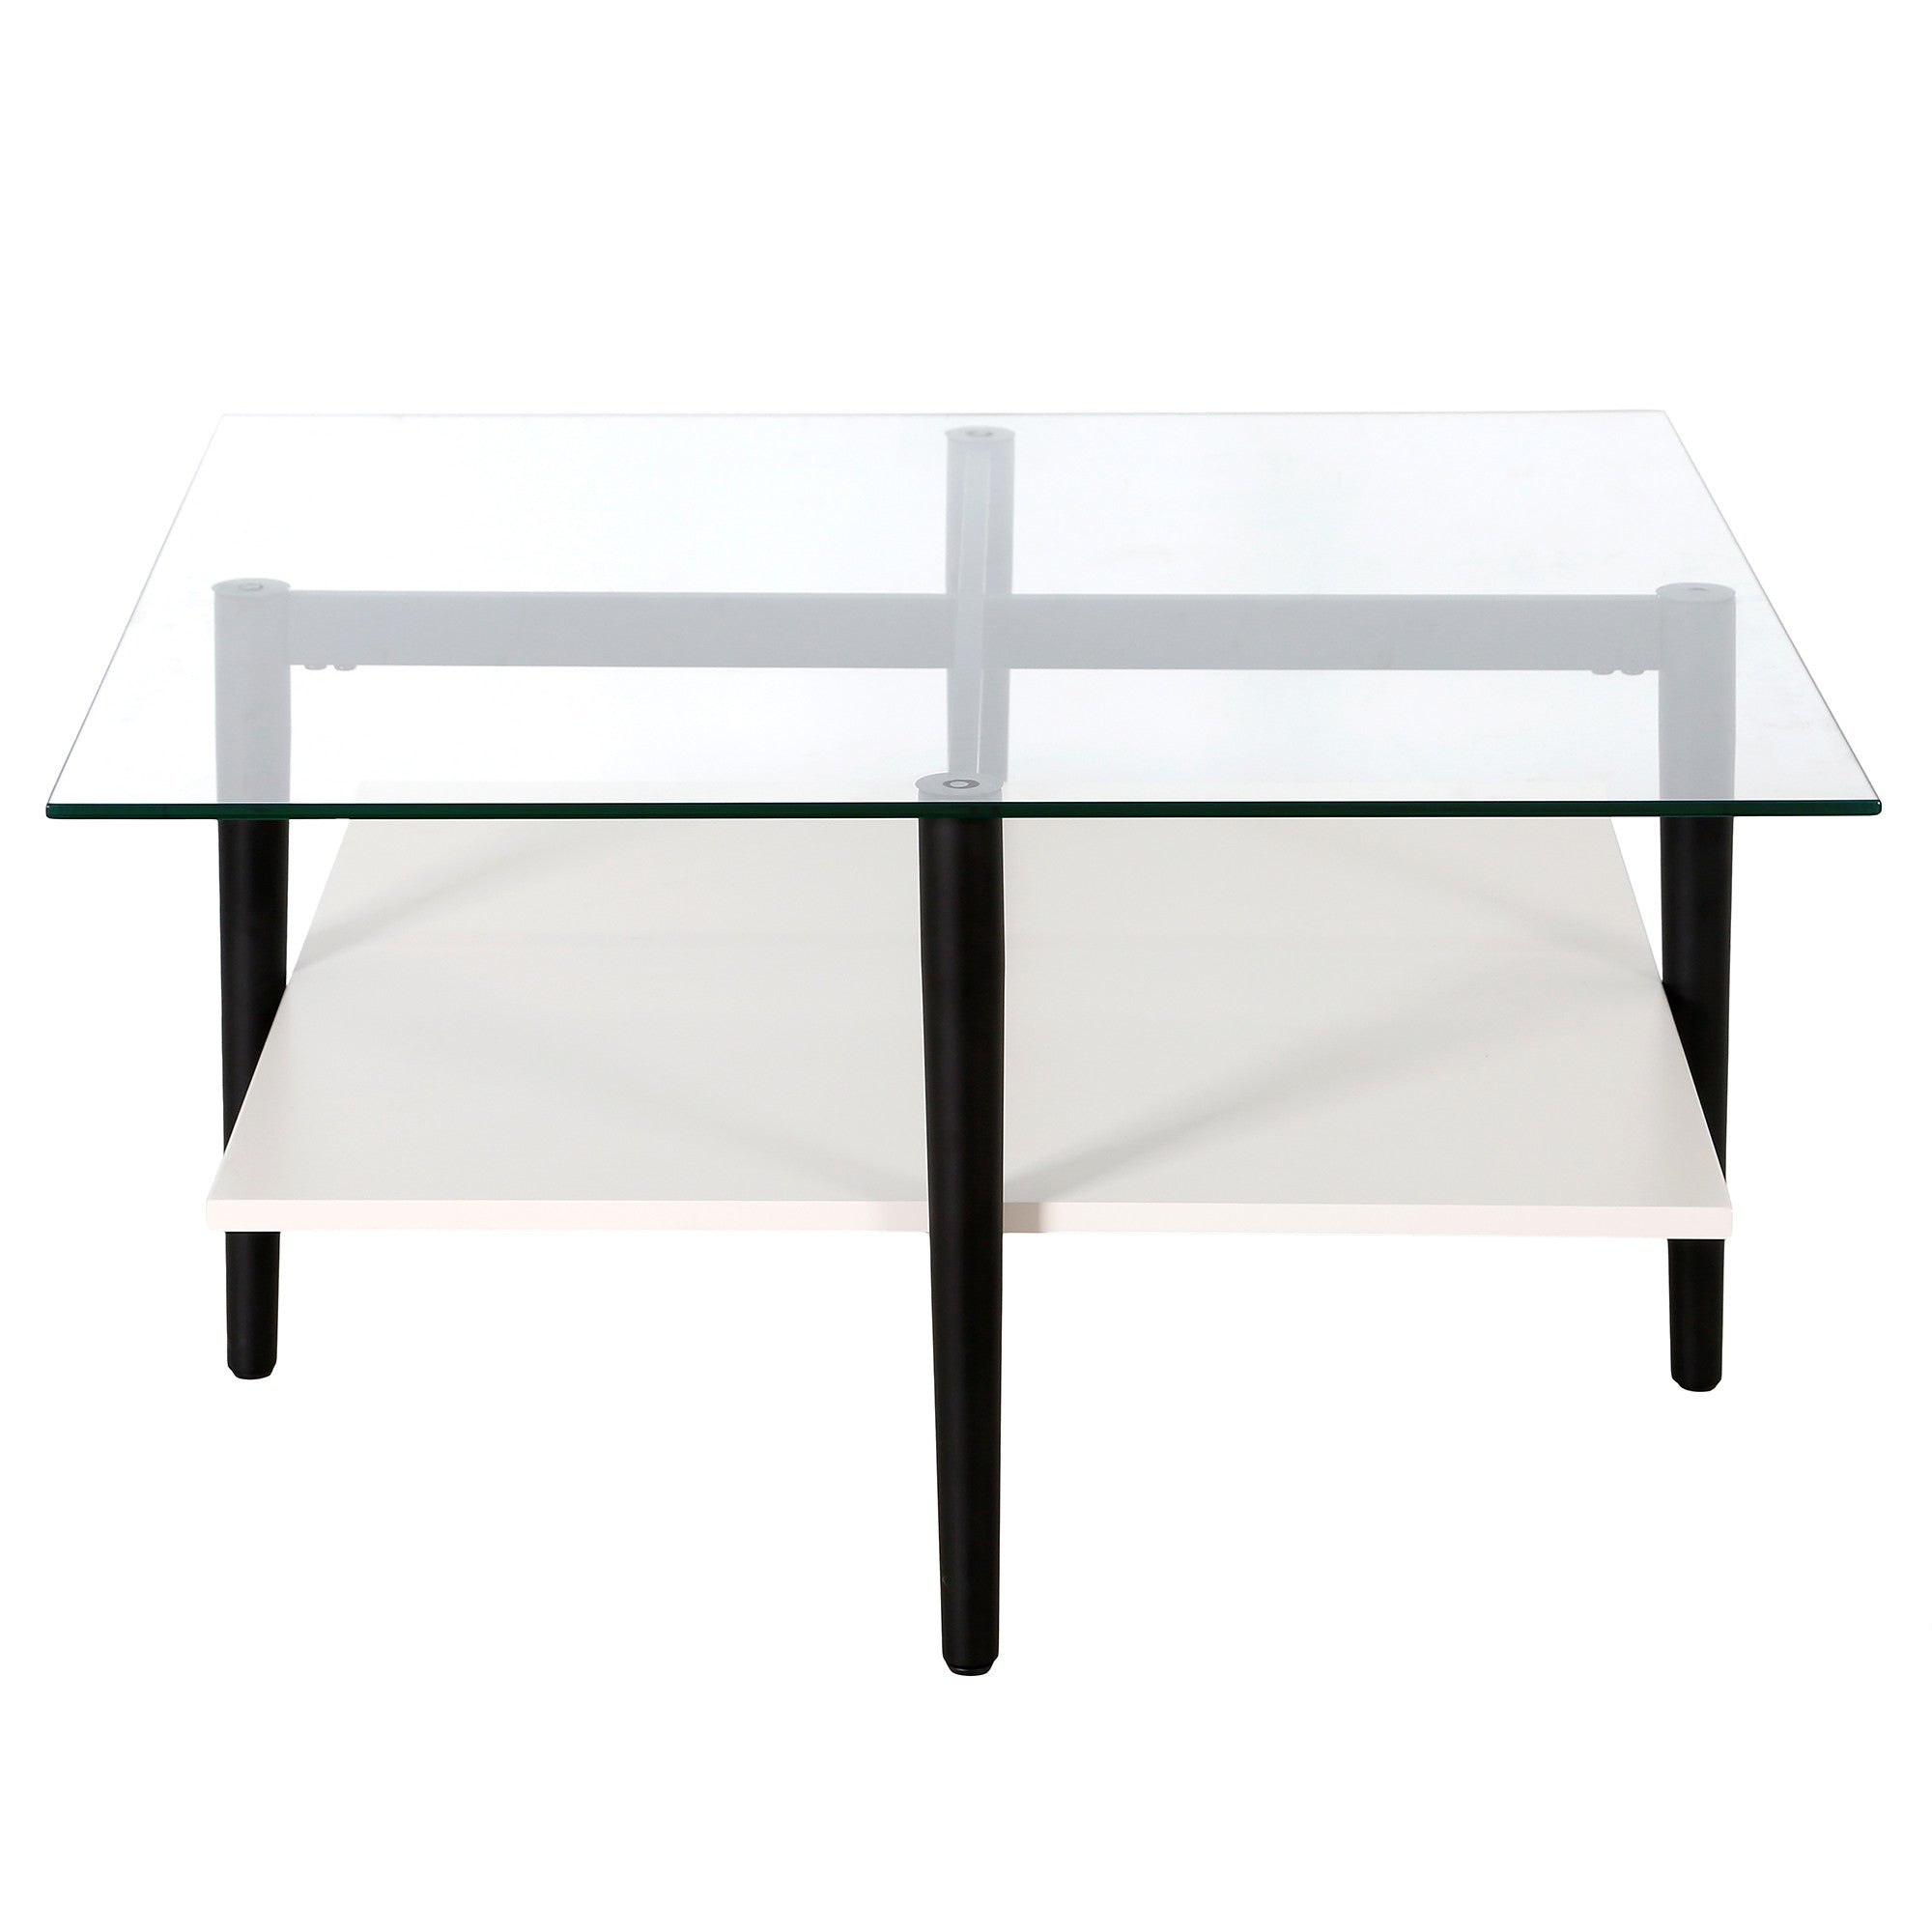 32" White And Black Glass And Steel Square Coffee Table With Shelf